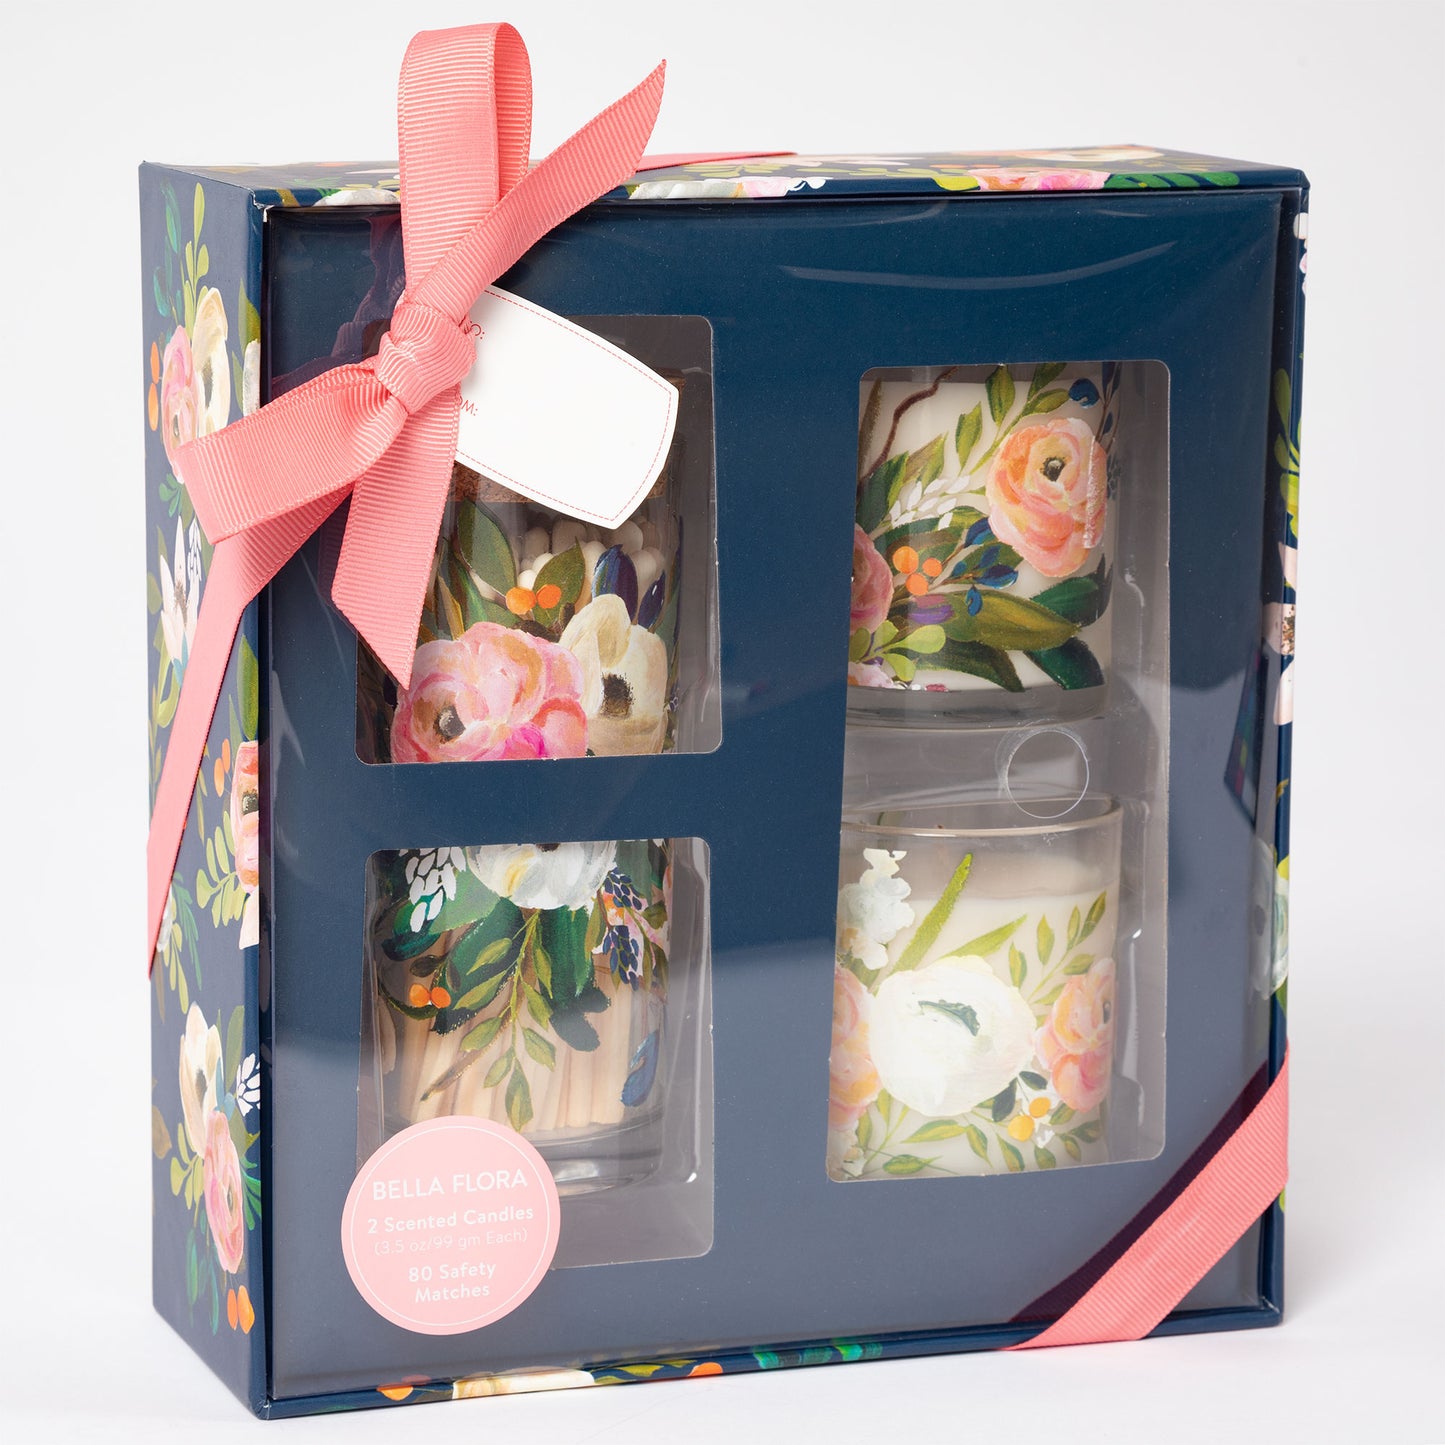 Blooming Candles Gift Set